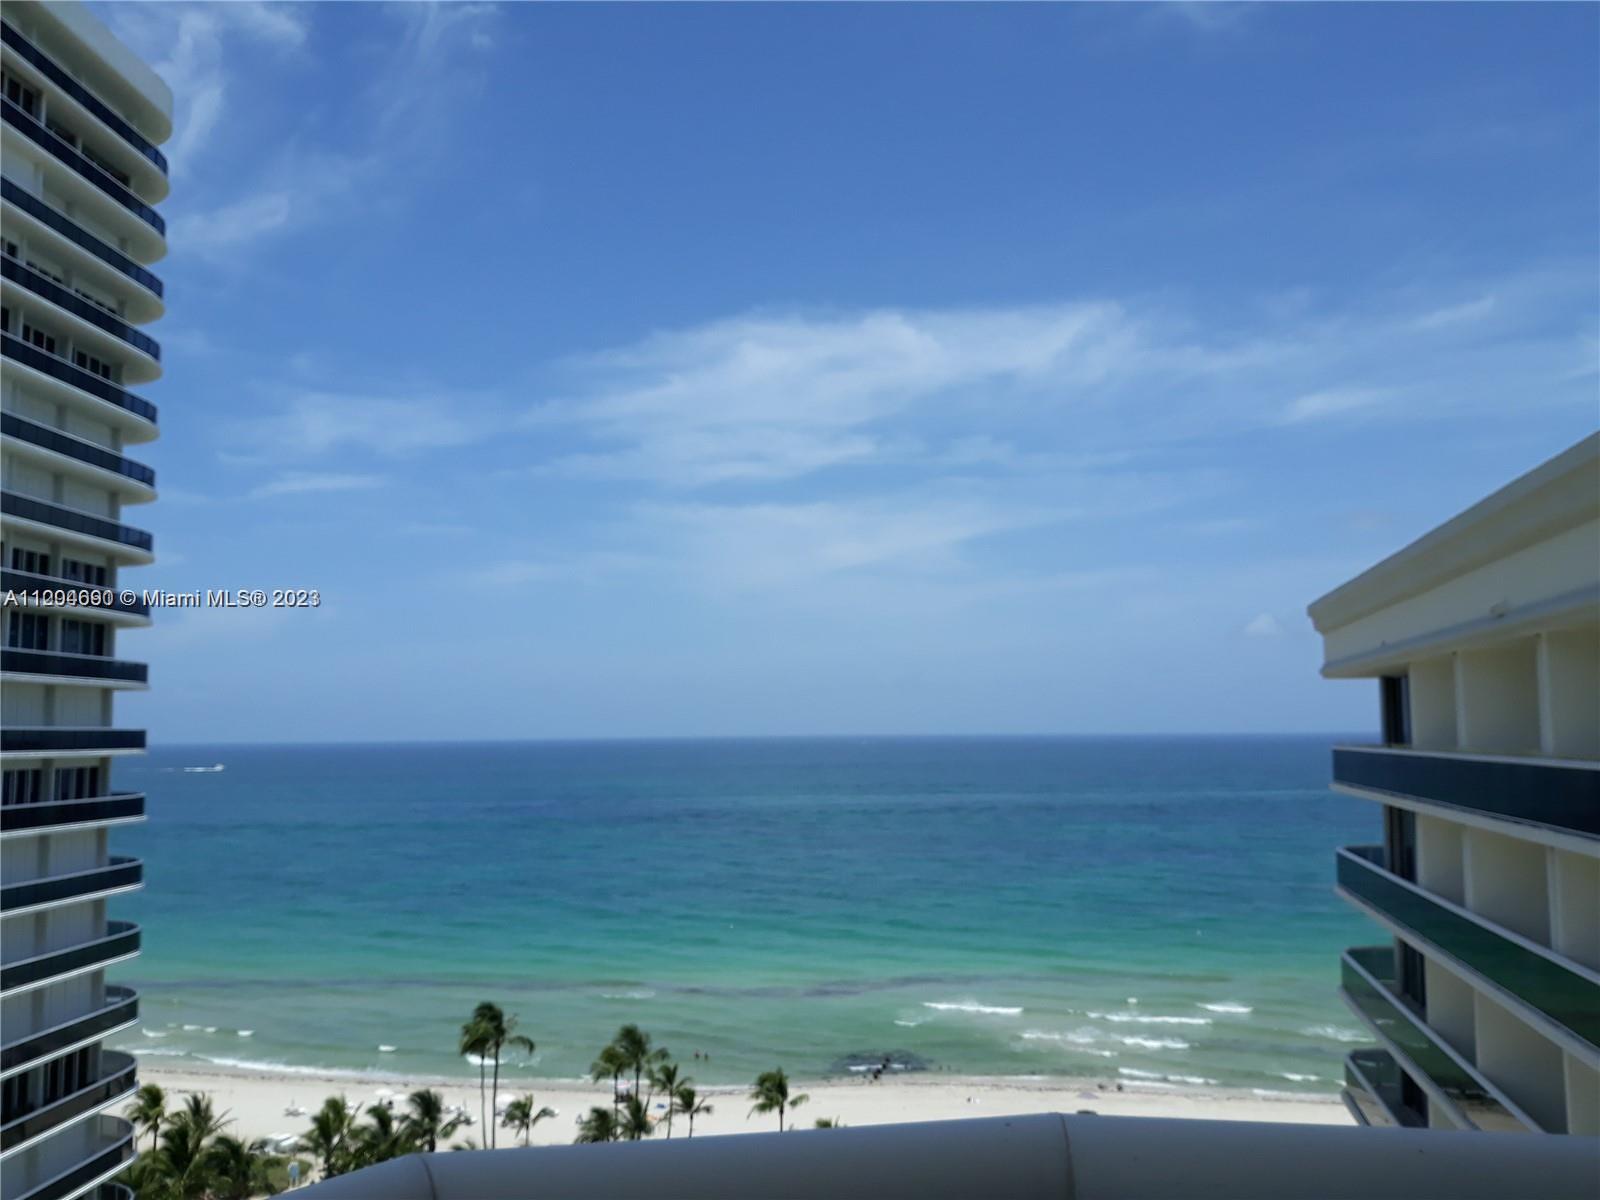 Condo for Rent in Surfside, FL